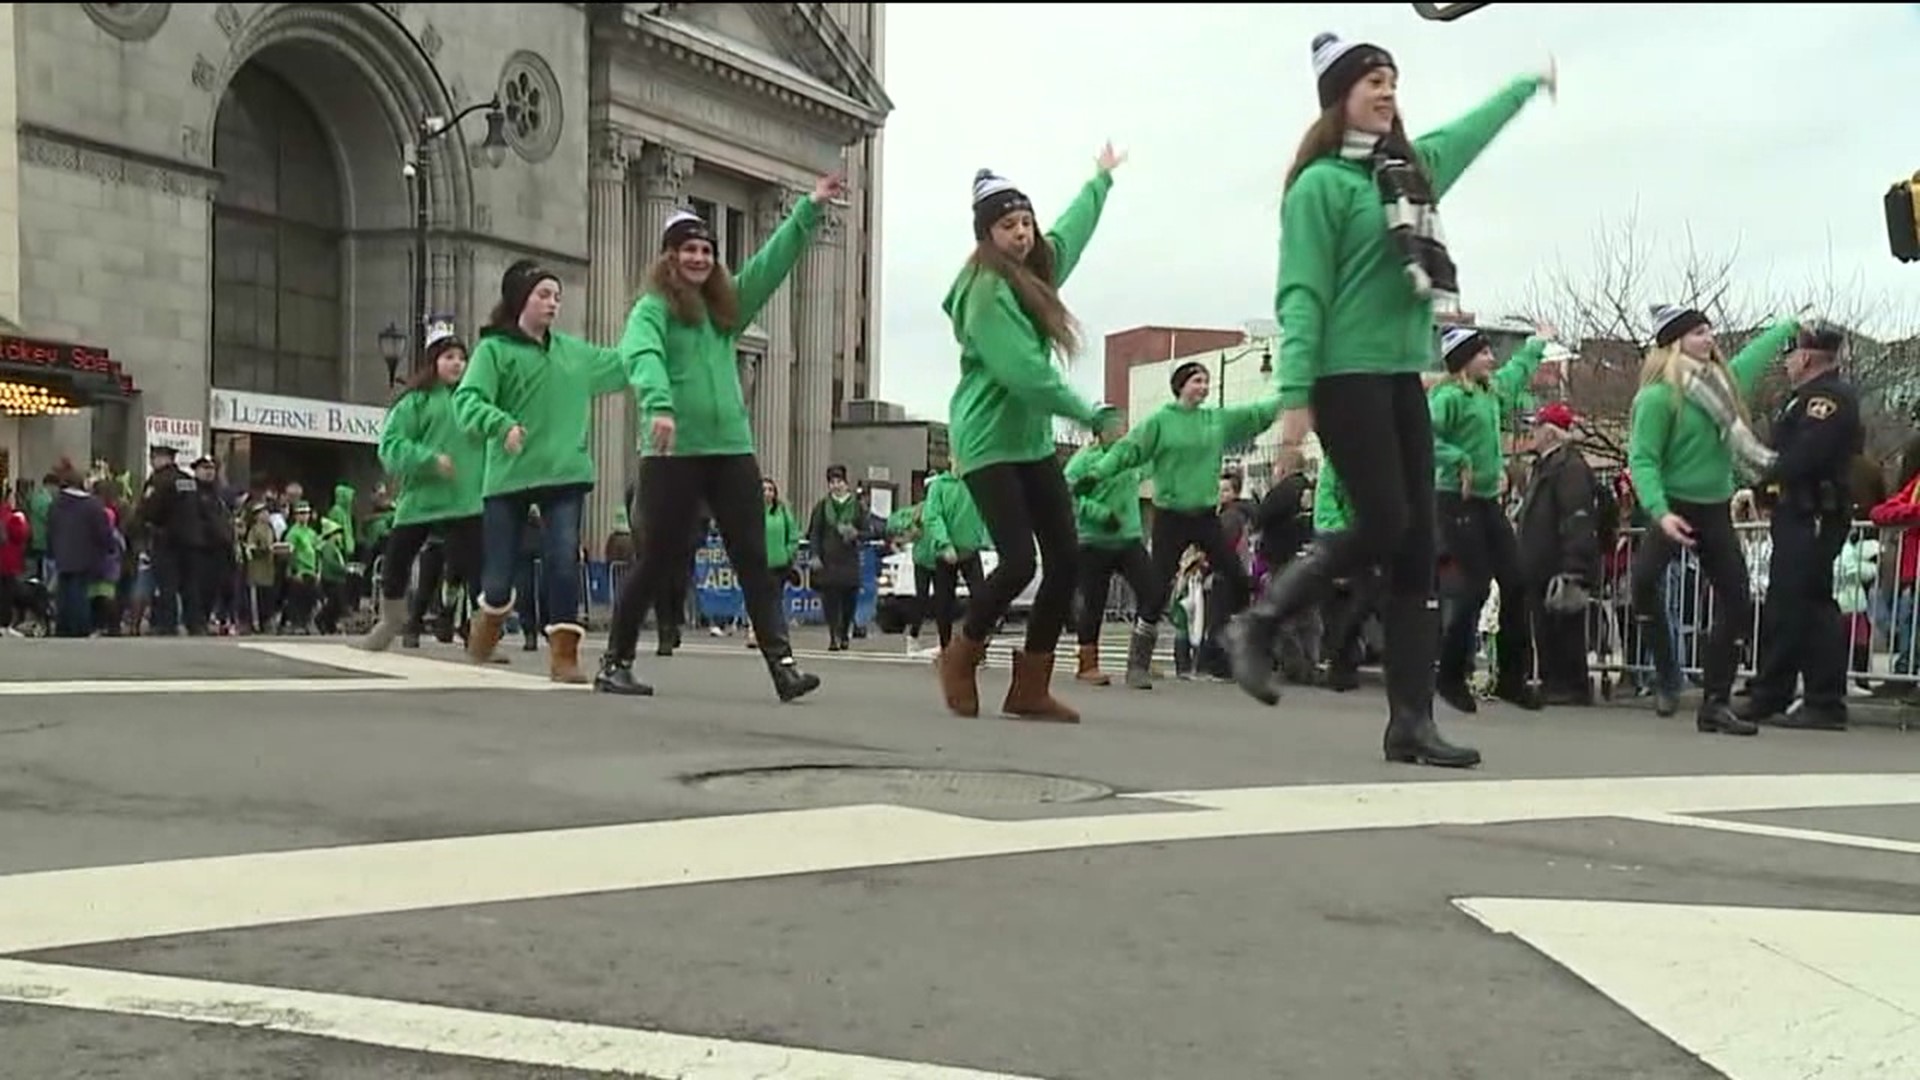 Thousands of people are expected to flock to the downtown for the big parade.